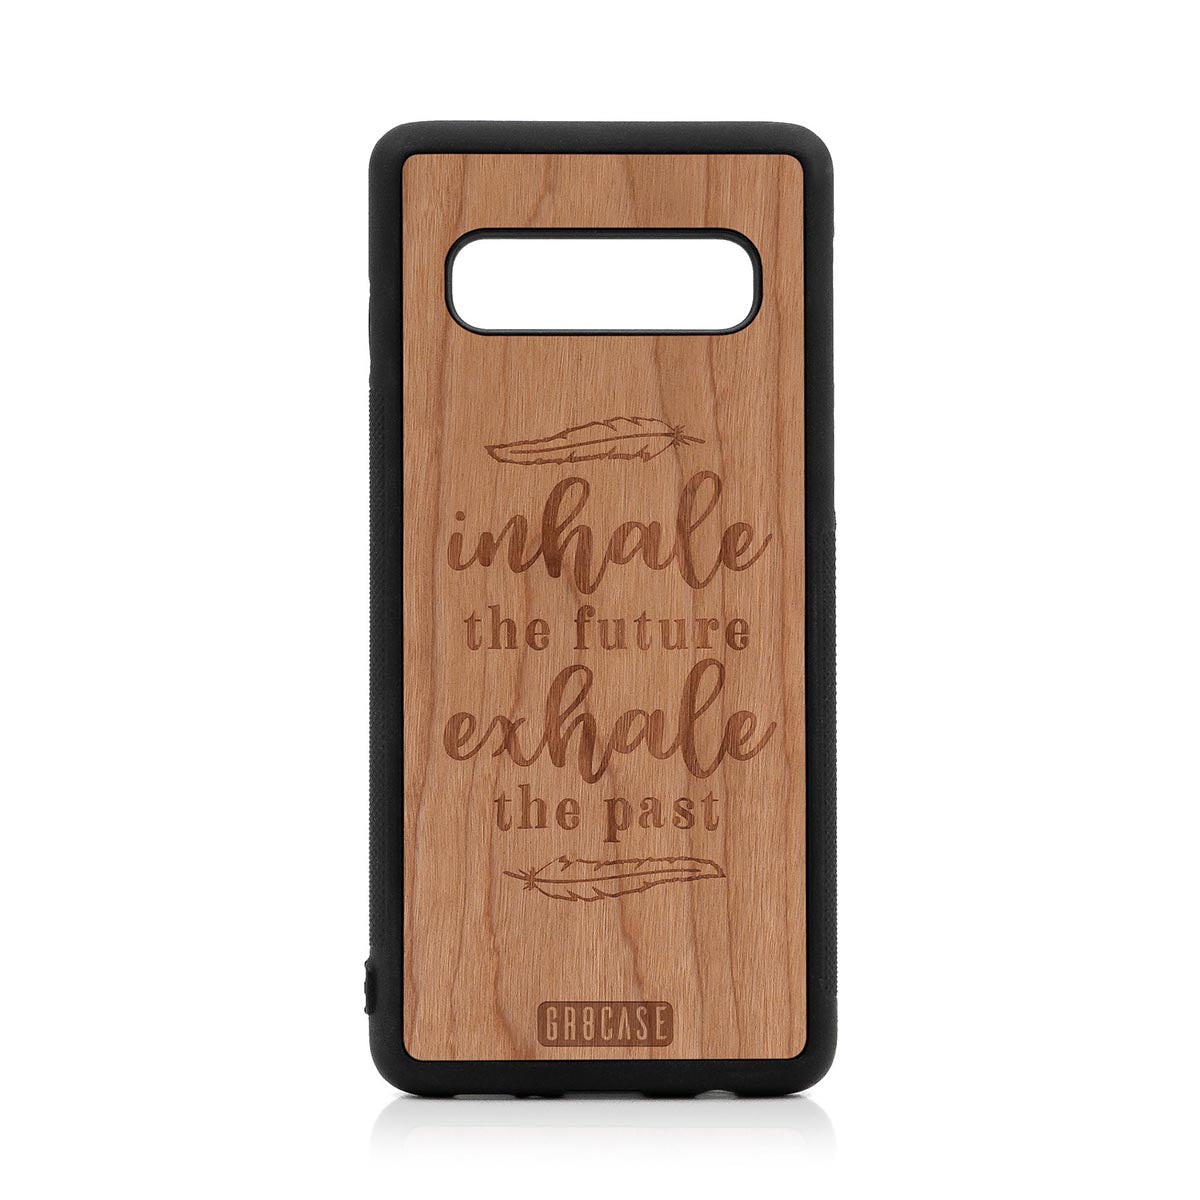 Inhale Future Exhale The Past Design Wood Case For Samsung Galaxy S10 by GR8CASE